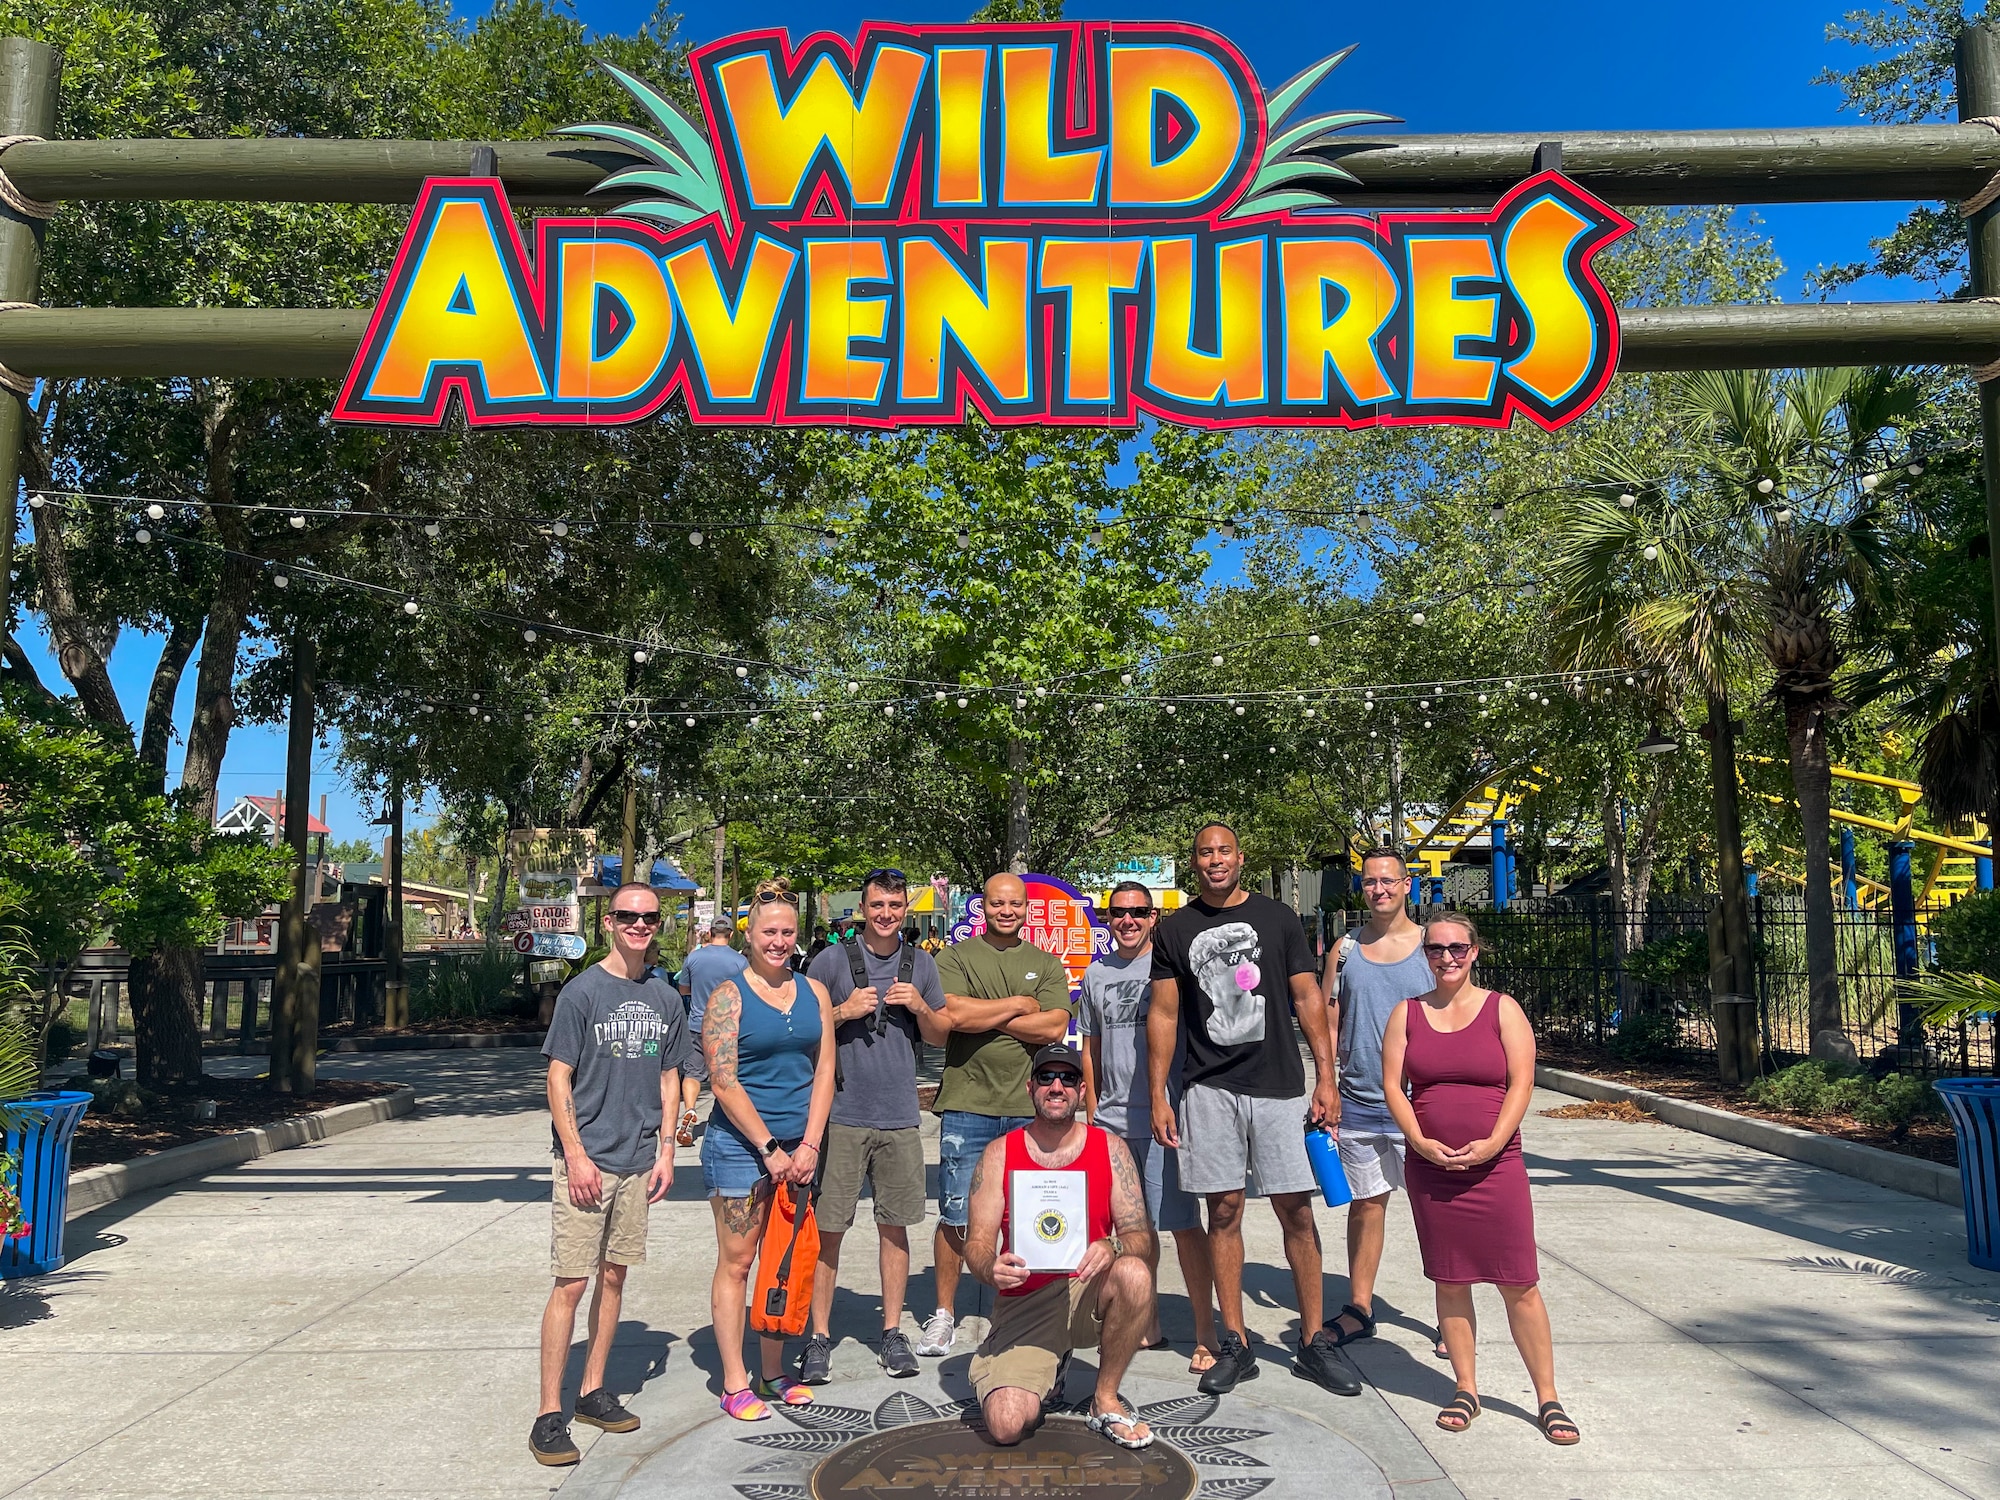 Airmen 4 Life group poses for photo at Wild Adventures